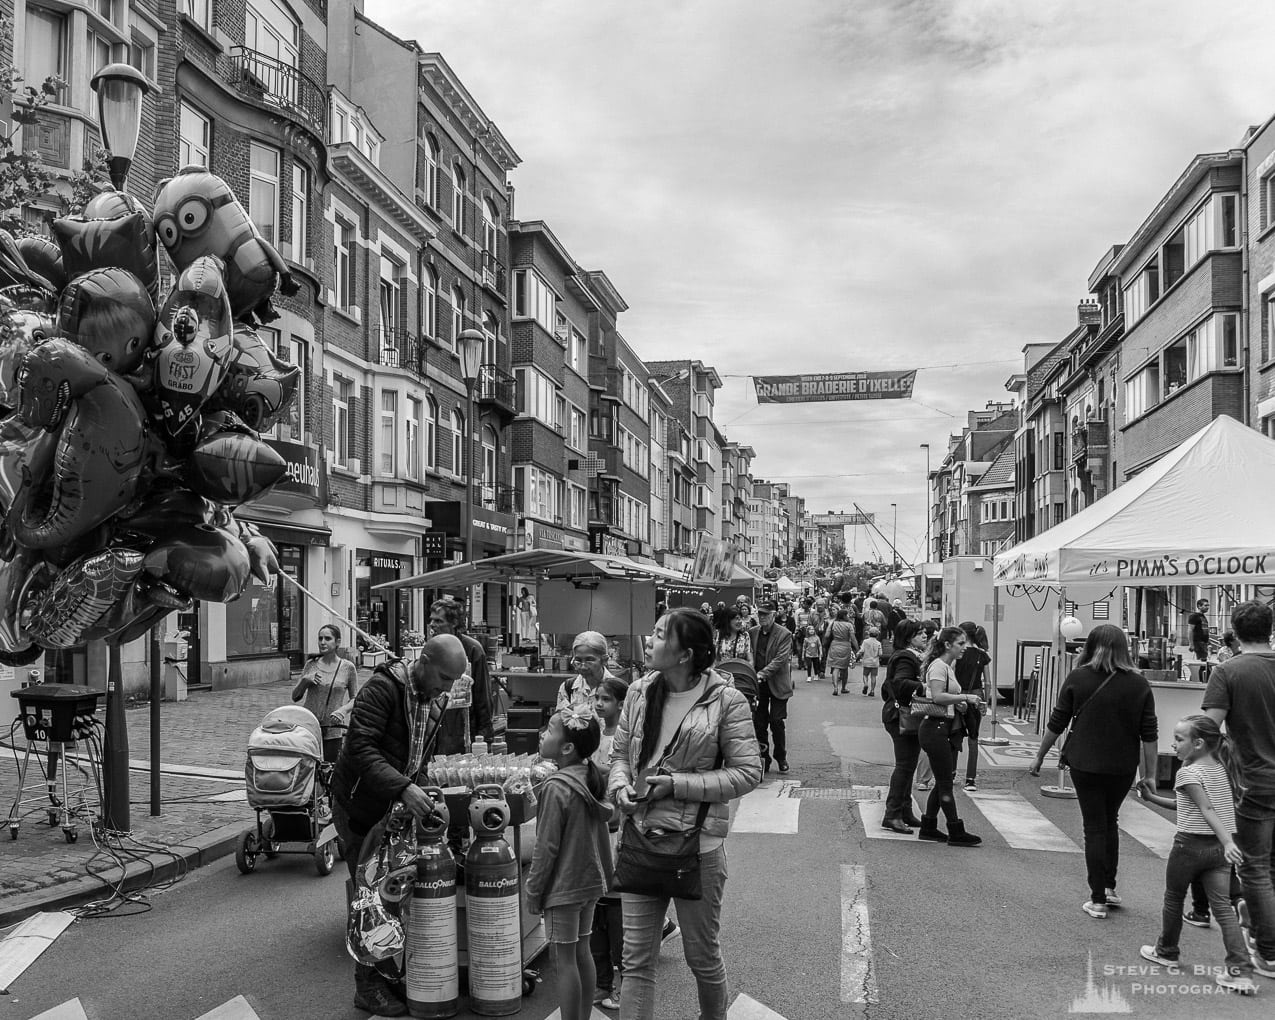 Photo 10/32 of a series of black and white photographs from the 2018 Grande Braderie D'Ixelles sidewalk sale and street festival in Brussels, Belgium.